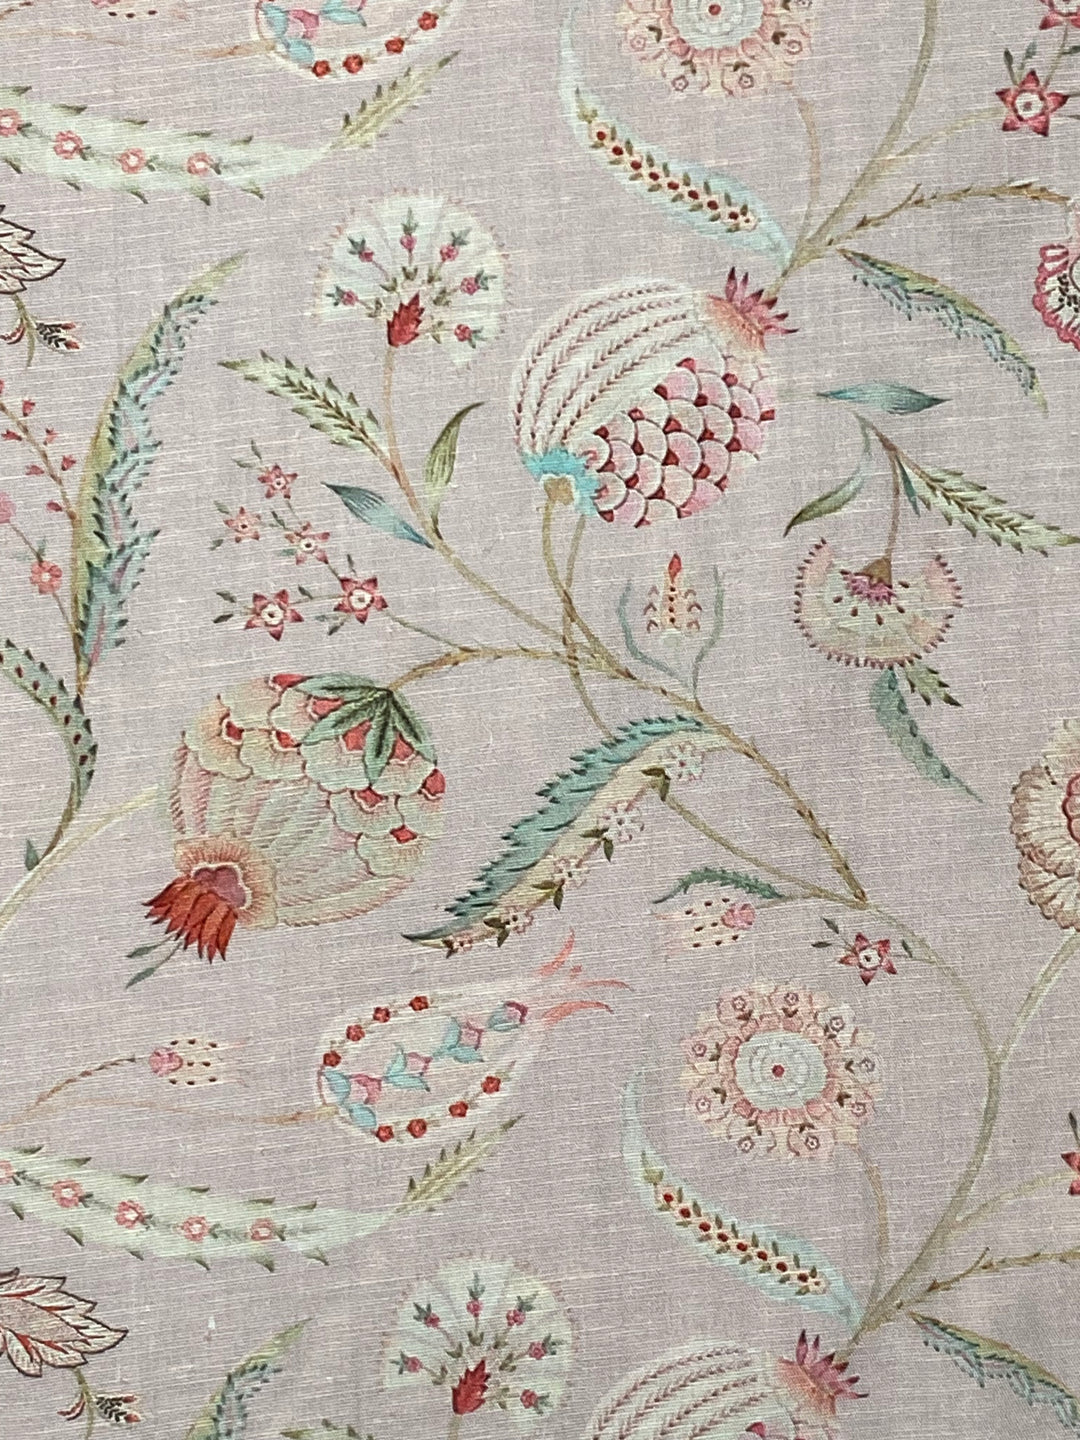 Printed Floral Muslin Linen Cotton Fabric